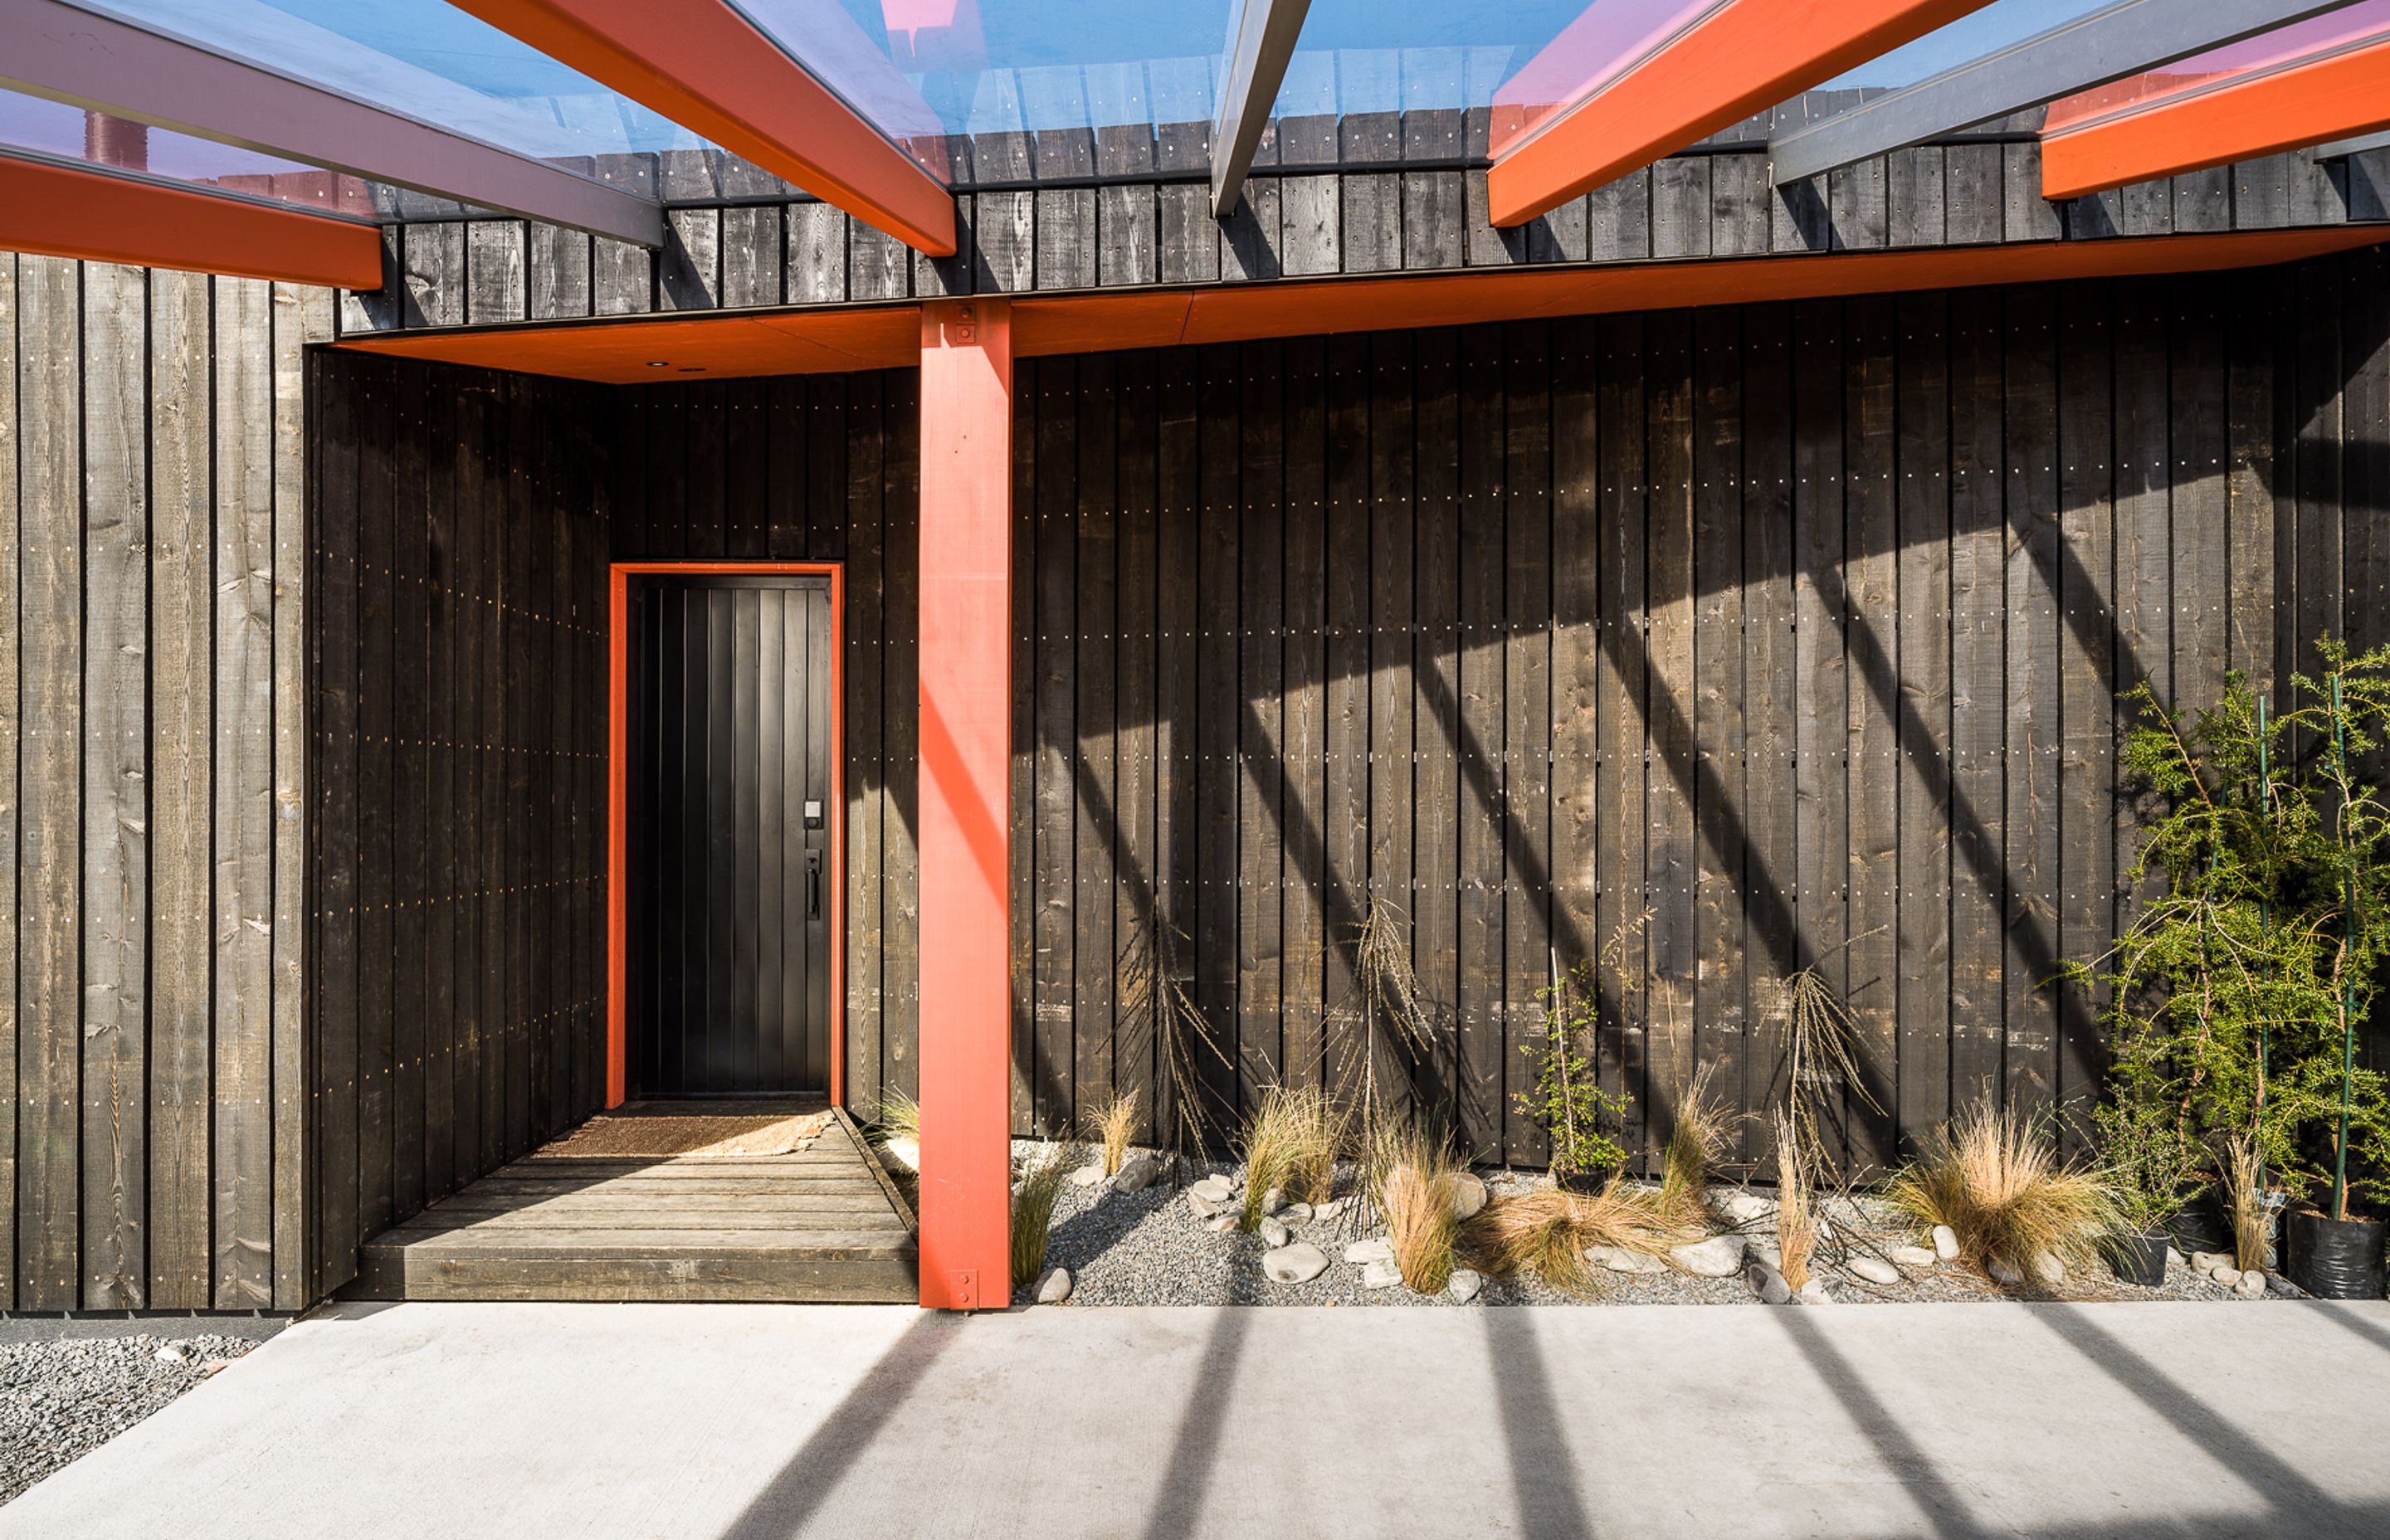 A series of burnt orange structural frames extending down from the cabin roofline, lend a sense of spaciousness to the overall design without increasing the permitted footprint.